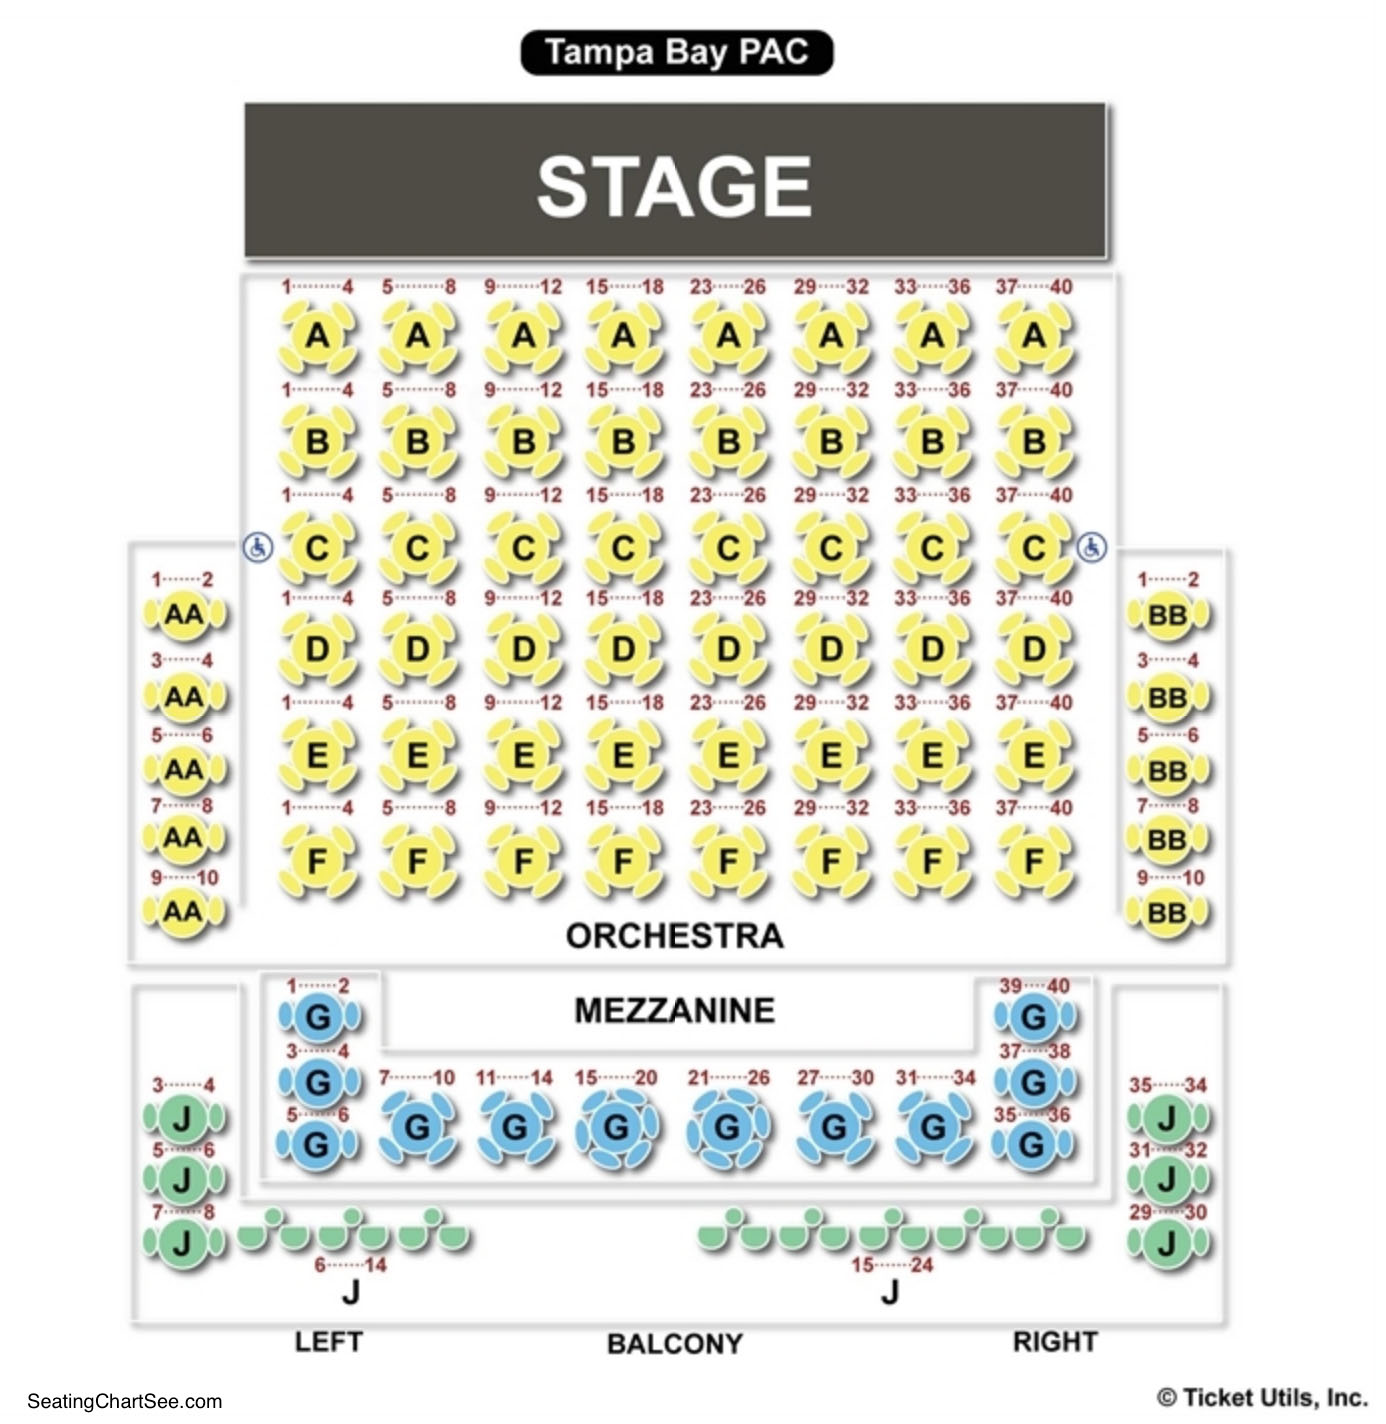 Straz Center Seating Chart Lion King Elcho Table